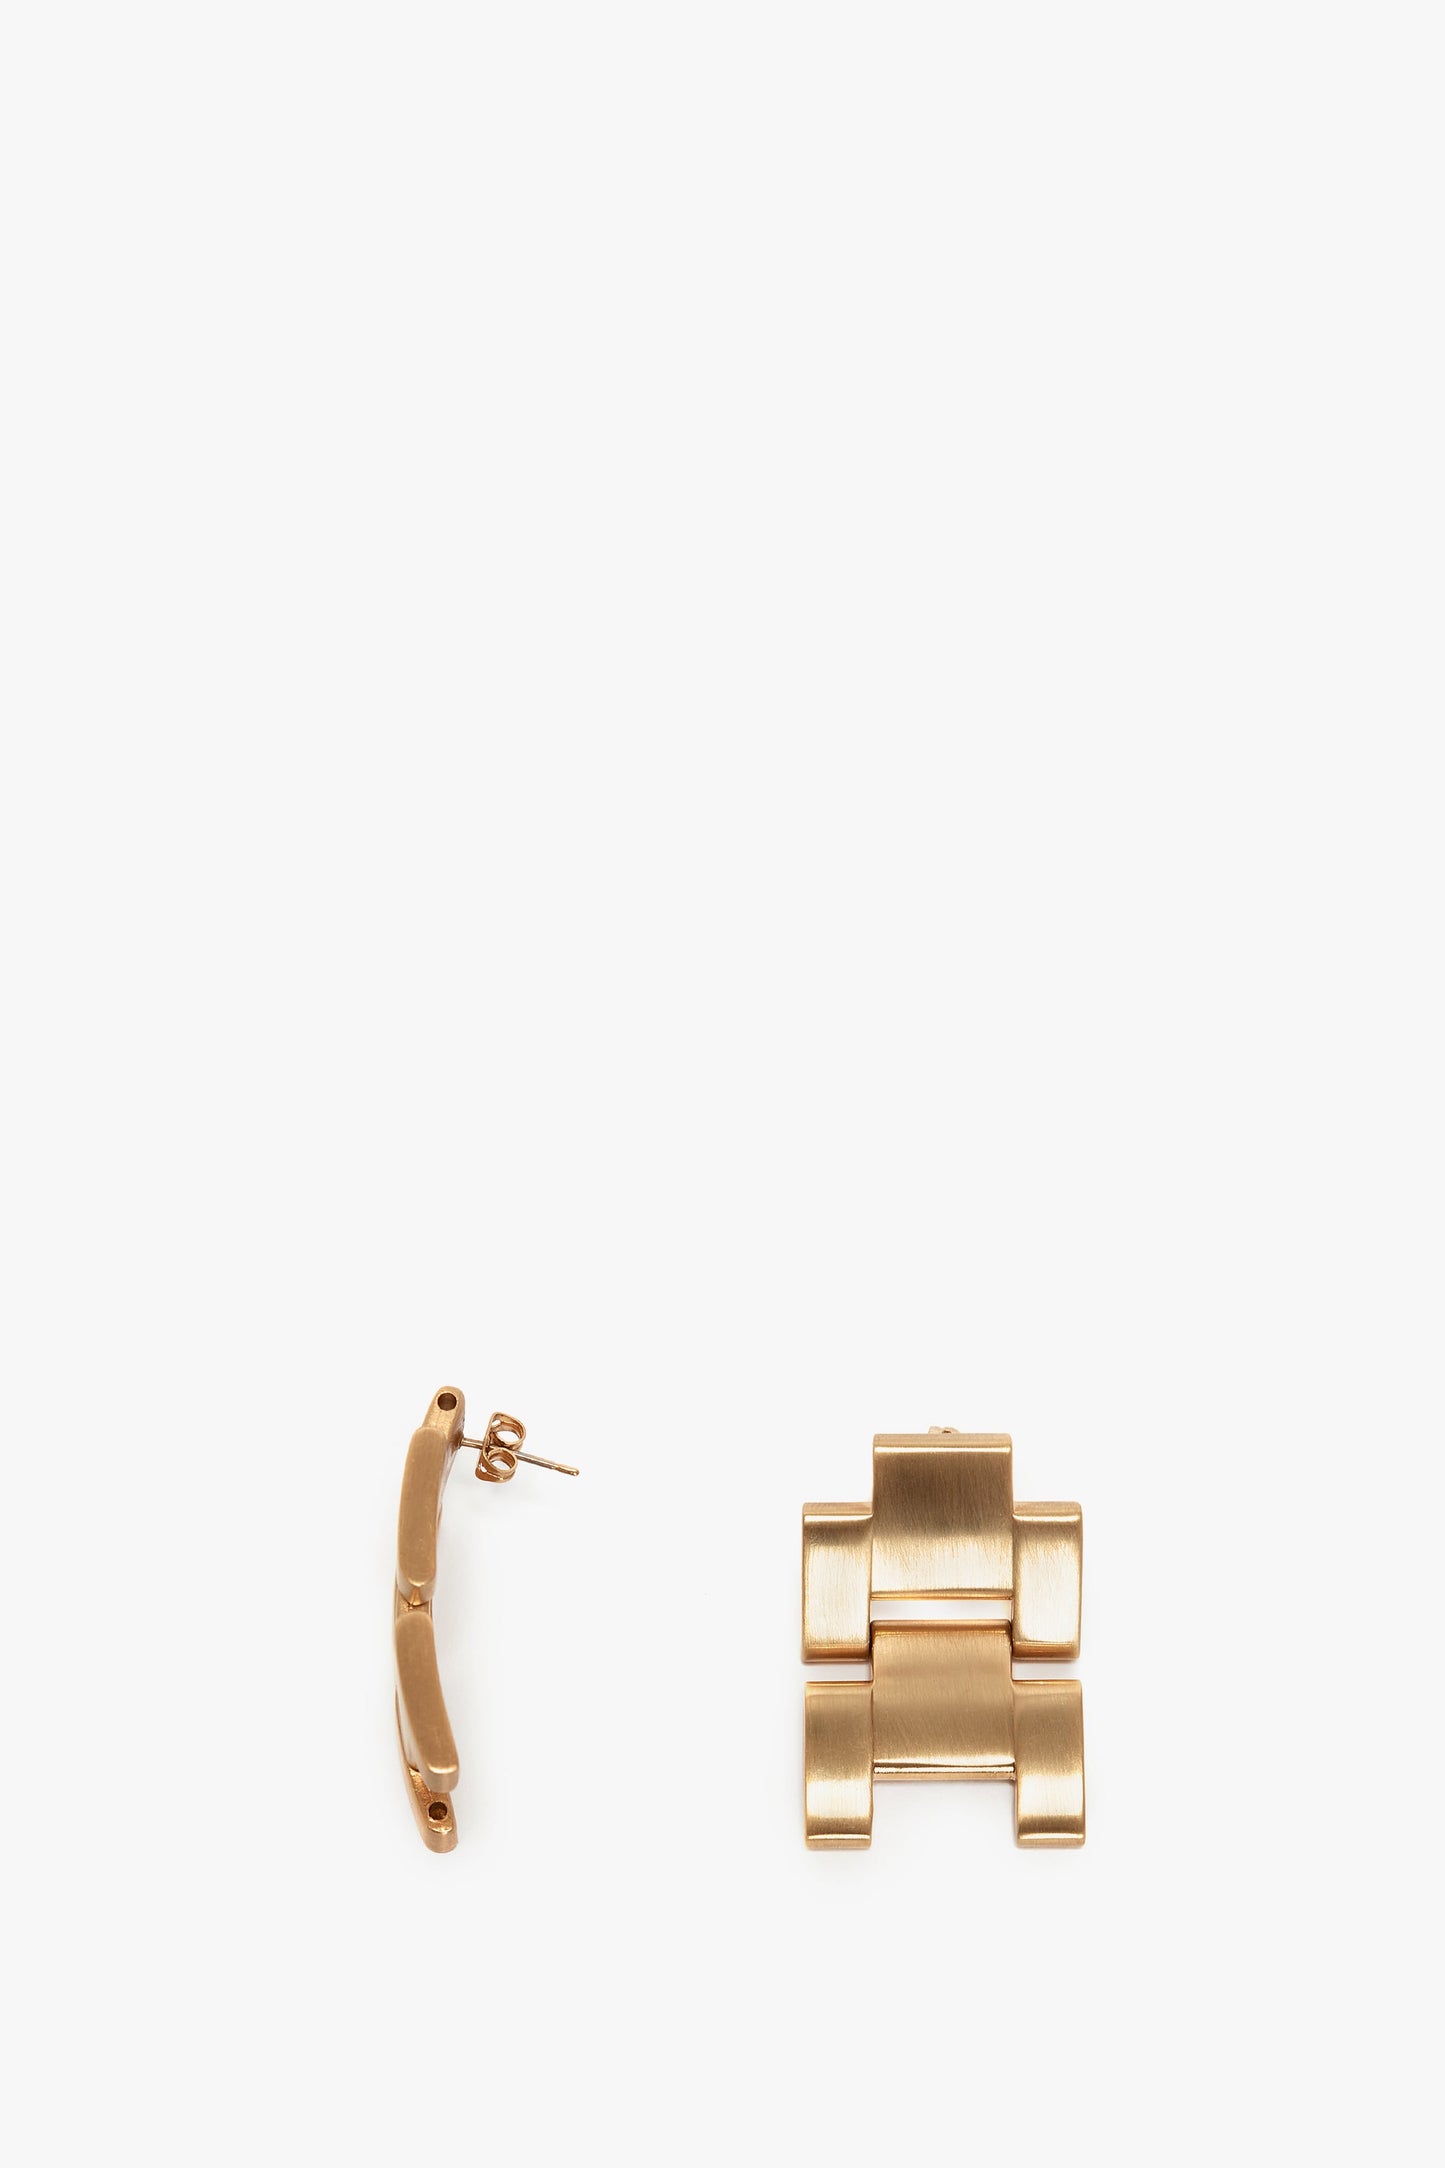 Exclusive Jumbo Chain Earrings in Brushed Gold – Victoria Beckham